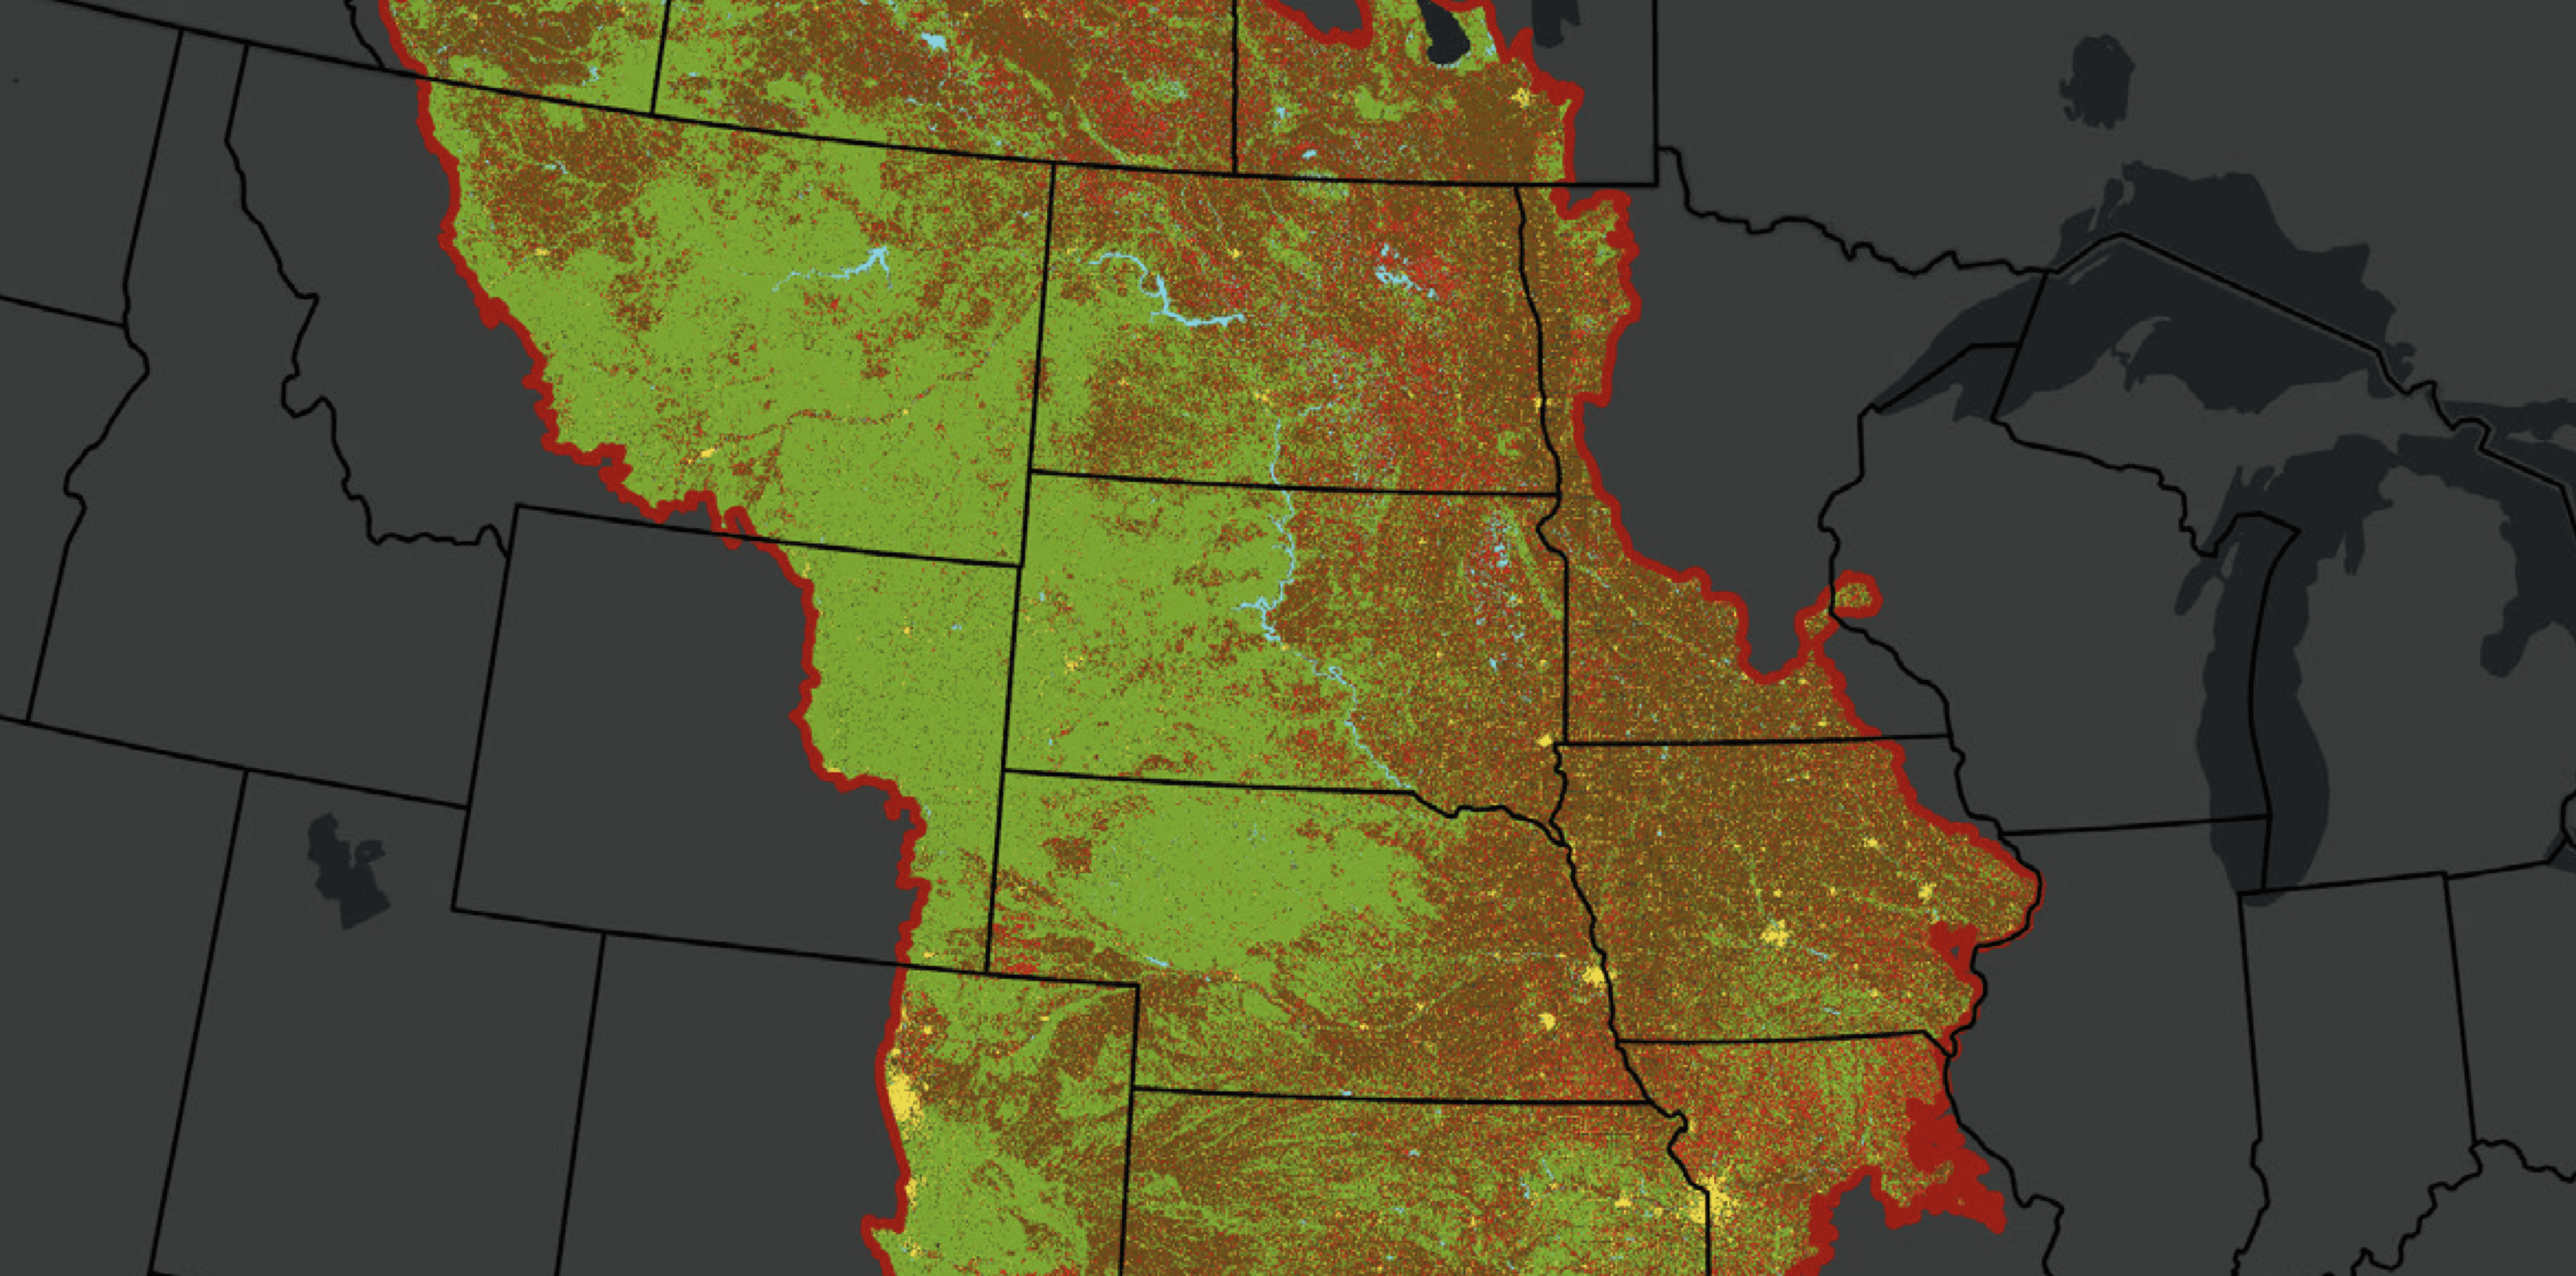 A map showing the status of North America's Central Grasslands